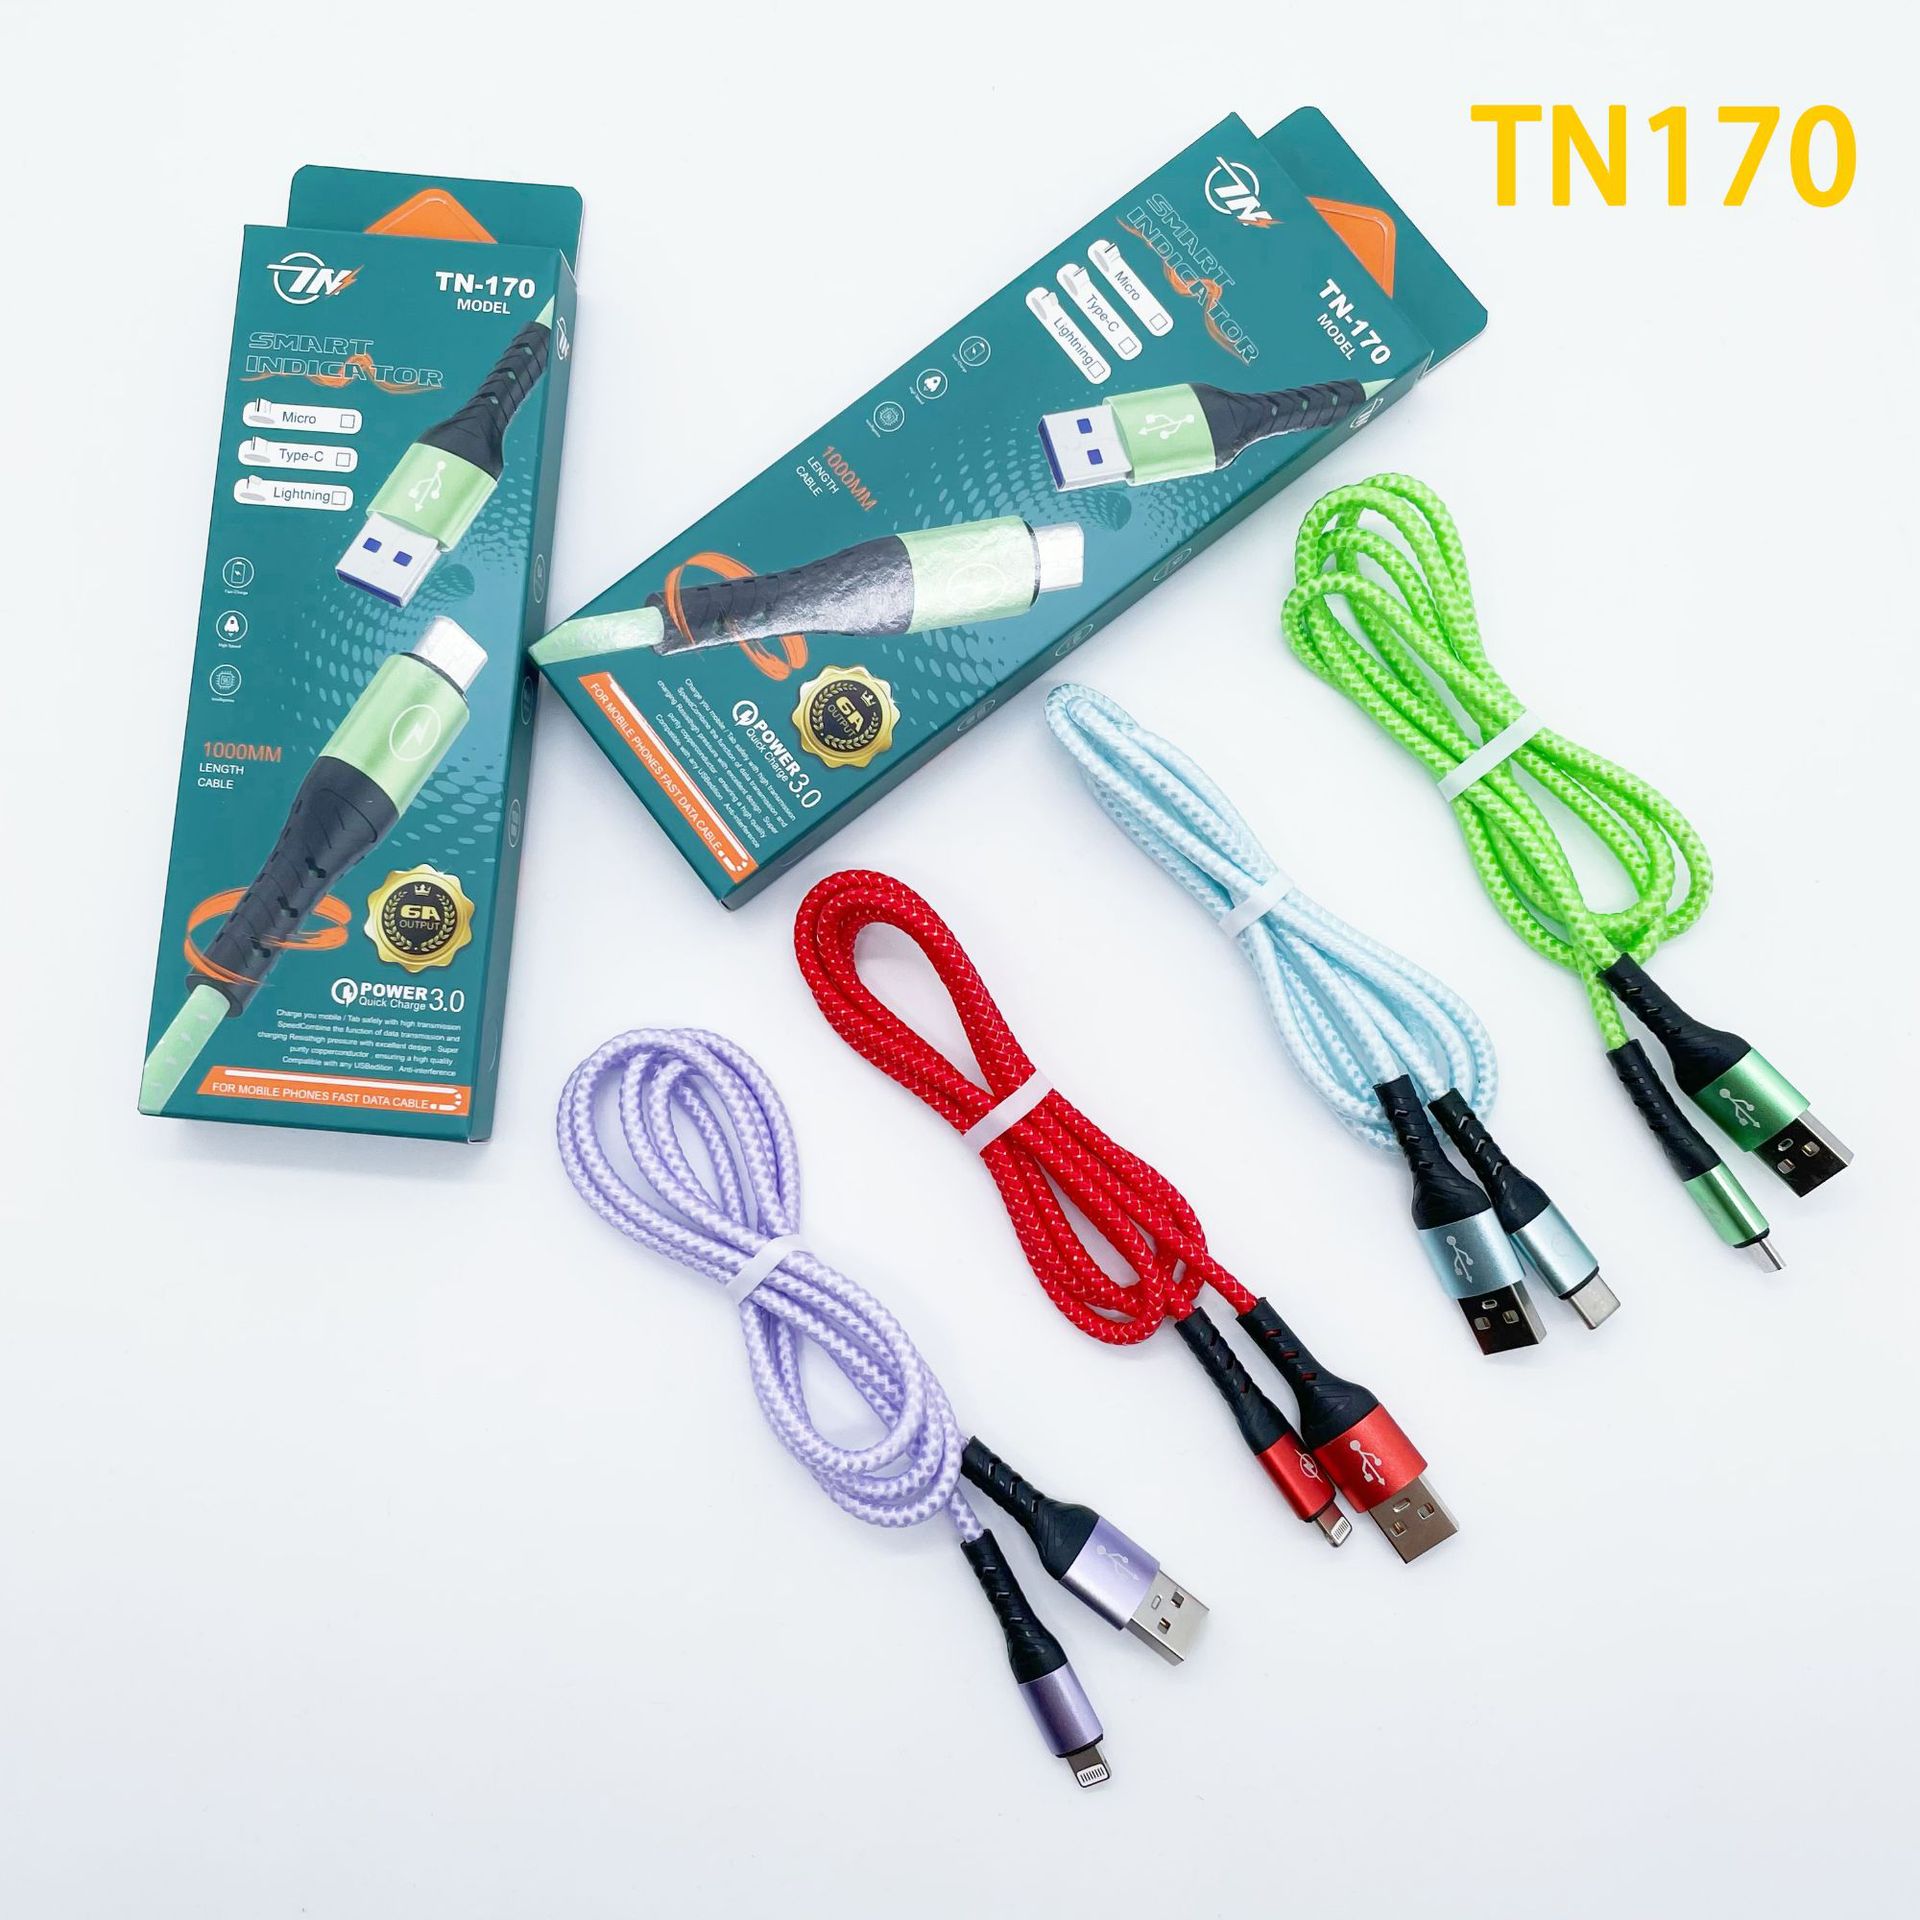 Tn170 New Woven Fast Charge Data Cable I5 Android TC Smartphone Qc3.0 Fast Charge Function Delivery Supported